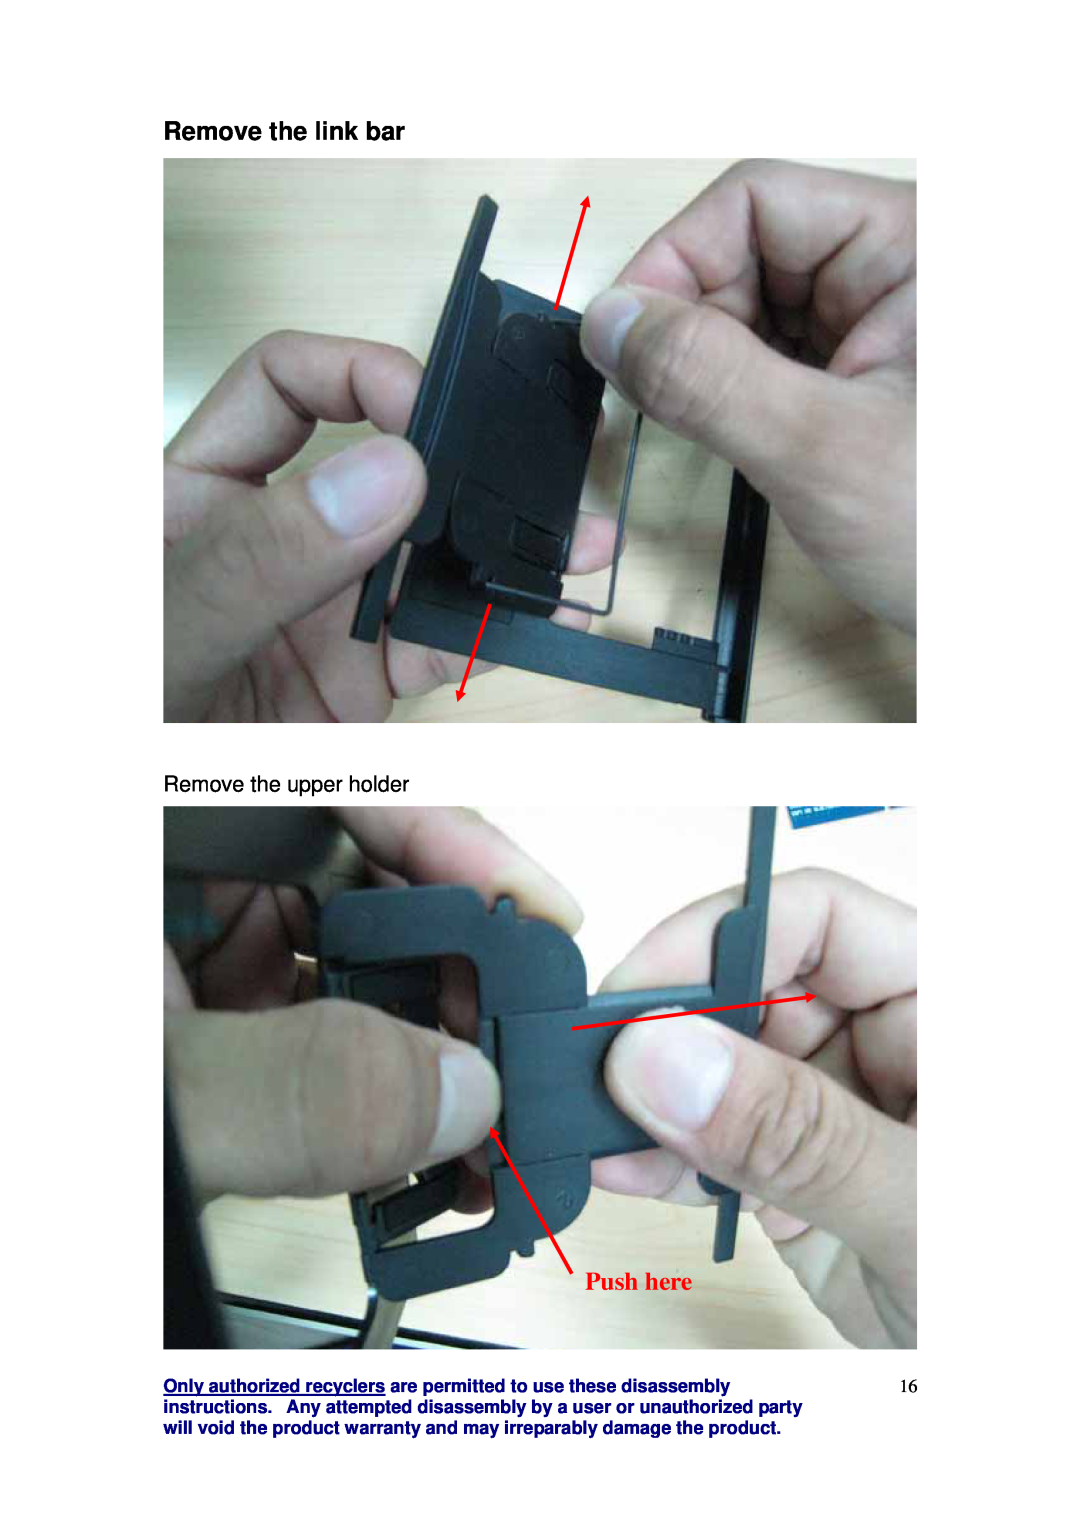 Palm 3245WW warranty Remove the link bar, Remove the upper holder, Push here 